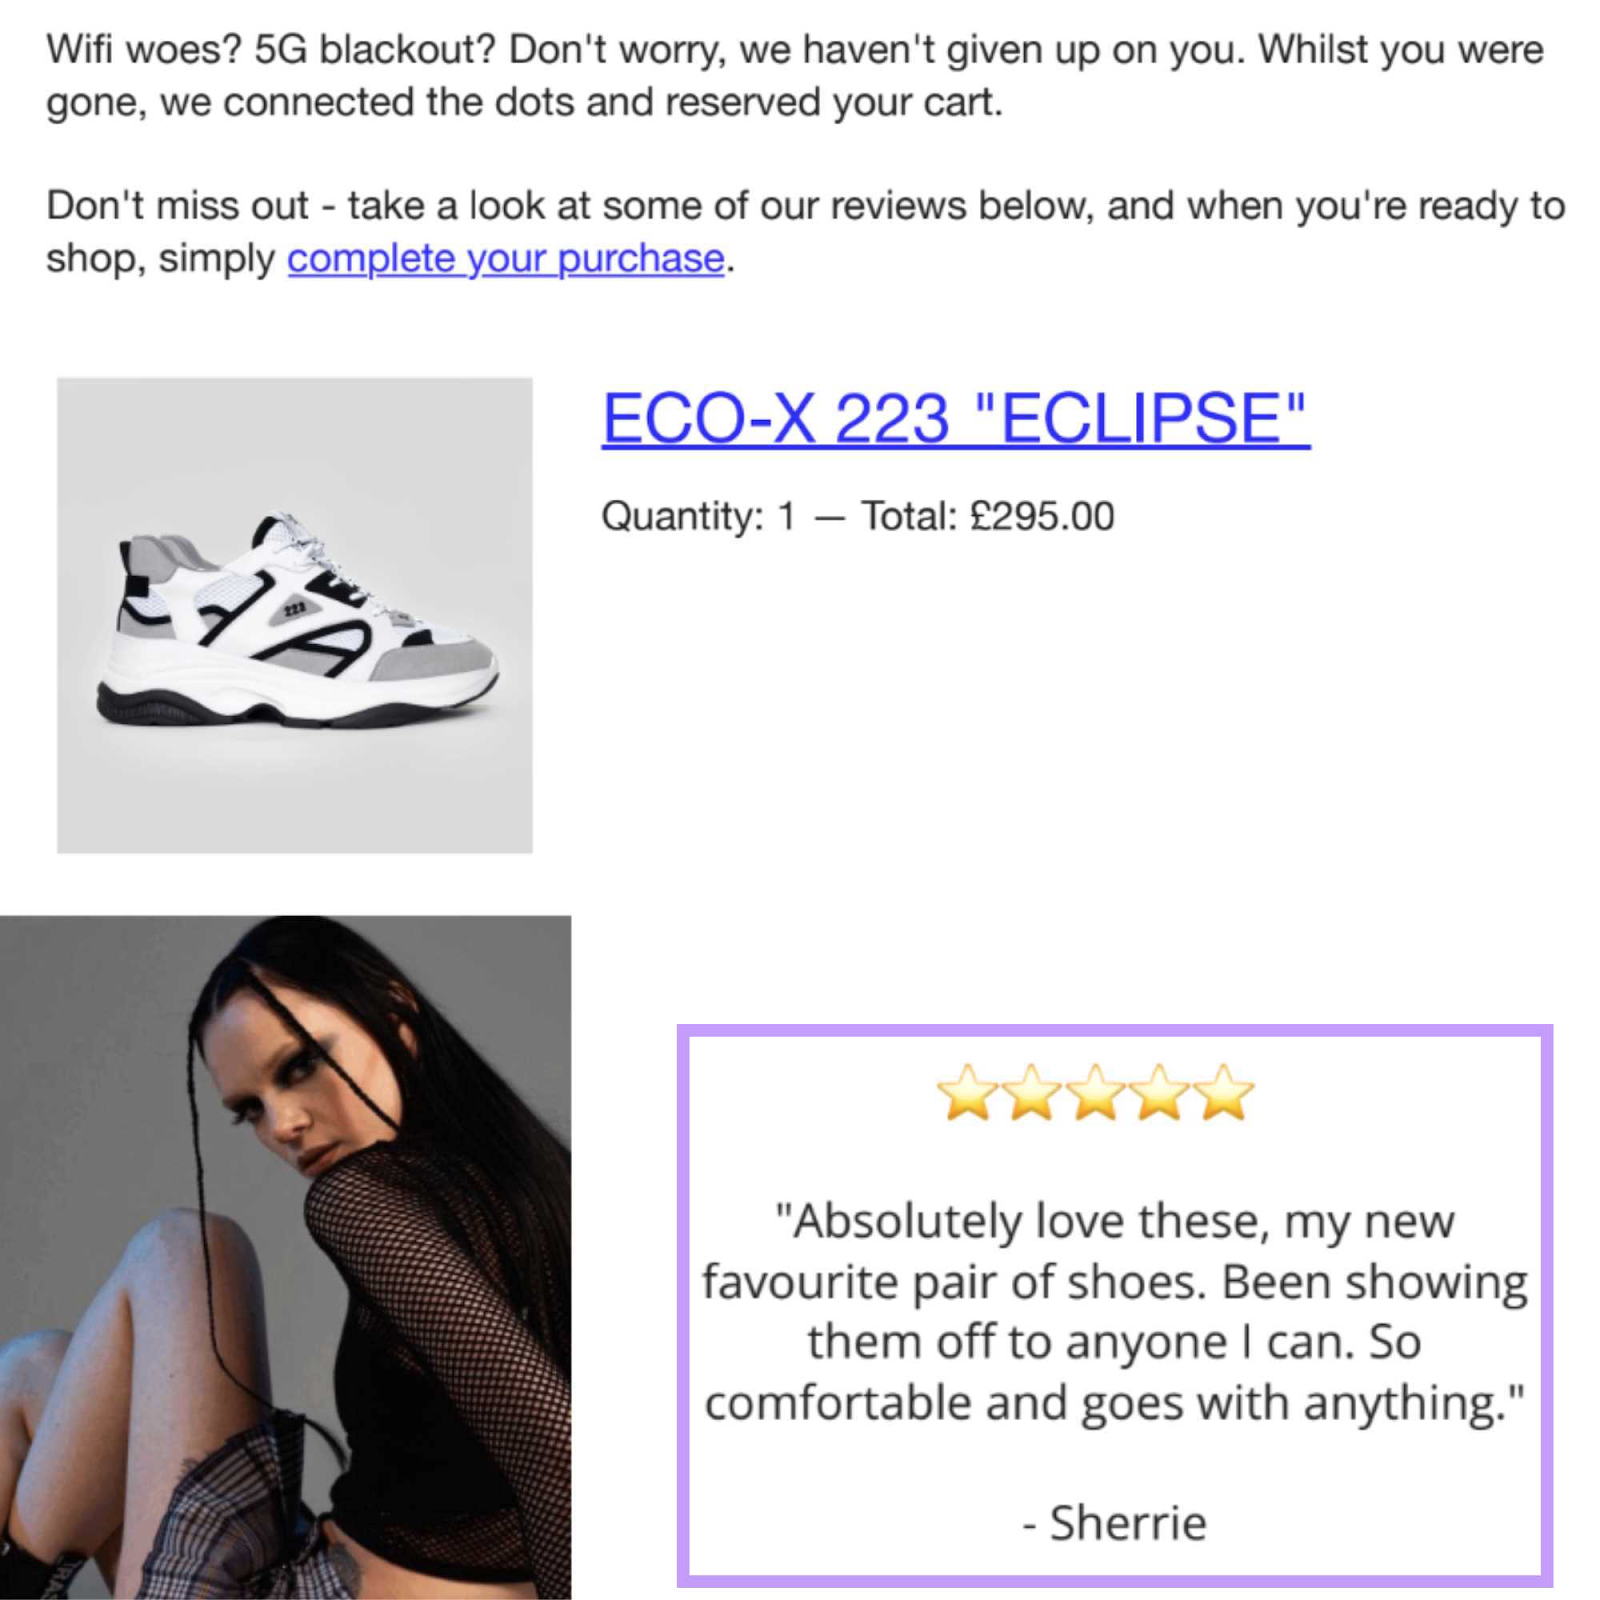 Abandoned cart email from shoe retailer Trash Planet showing a pair of shoes and a customer review for the shoes.